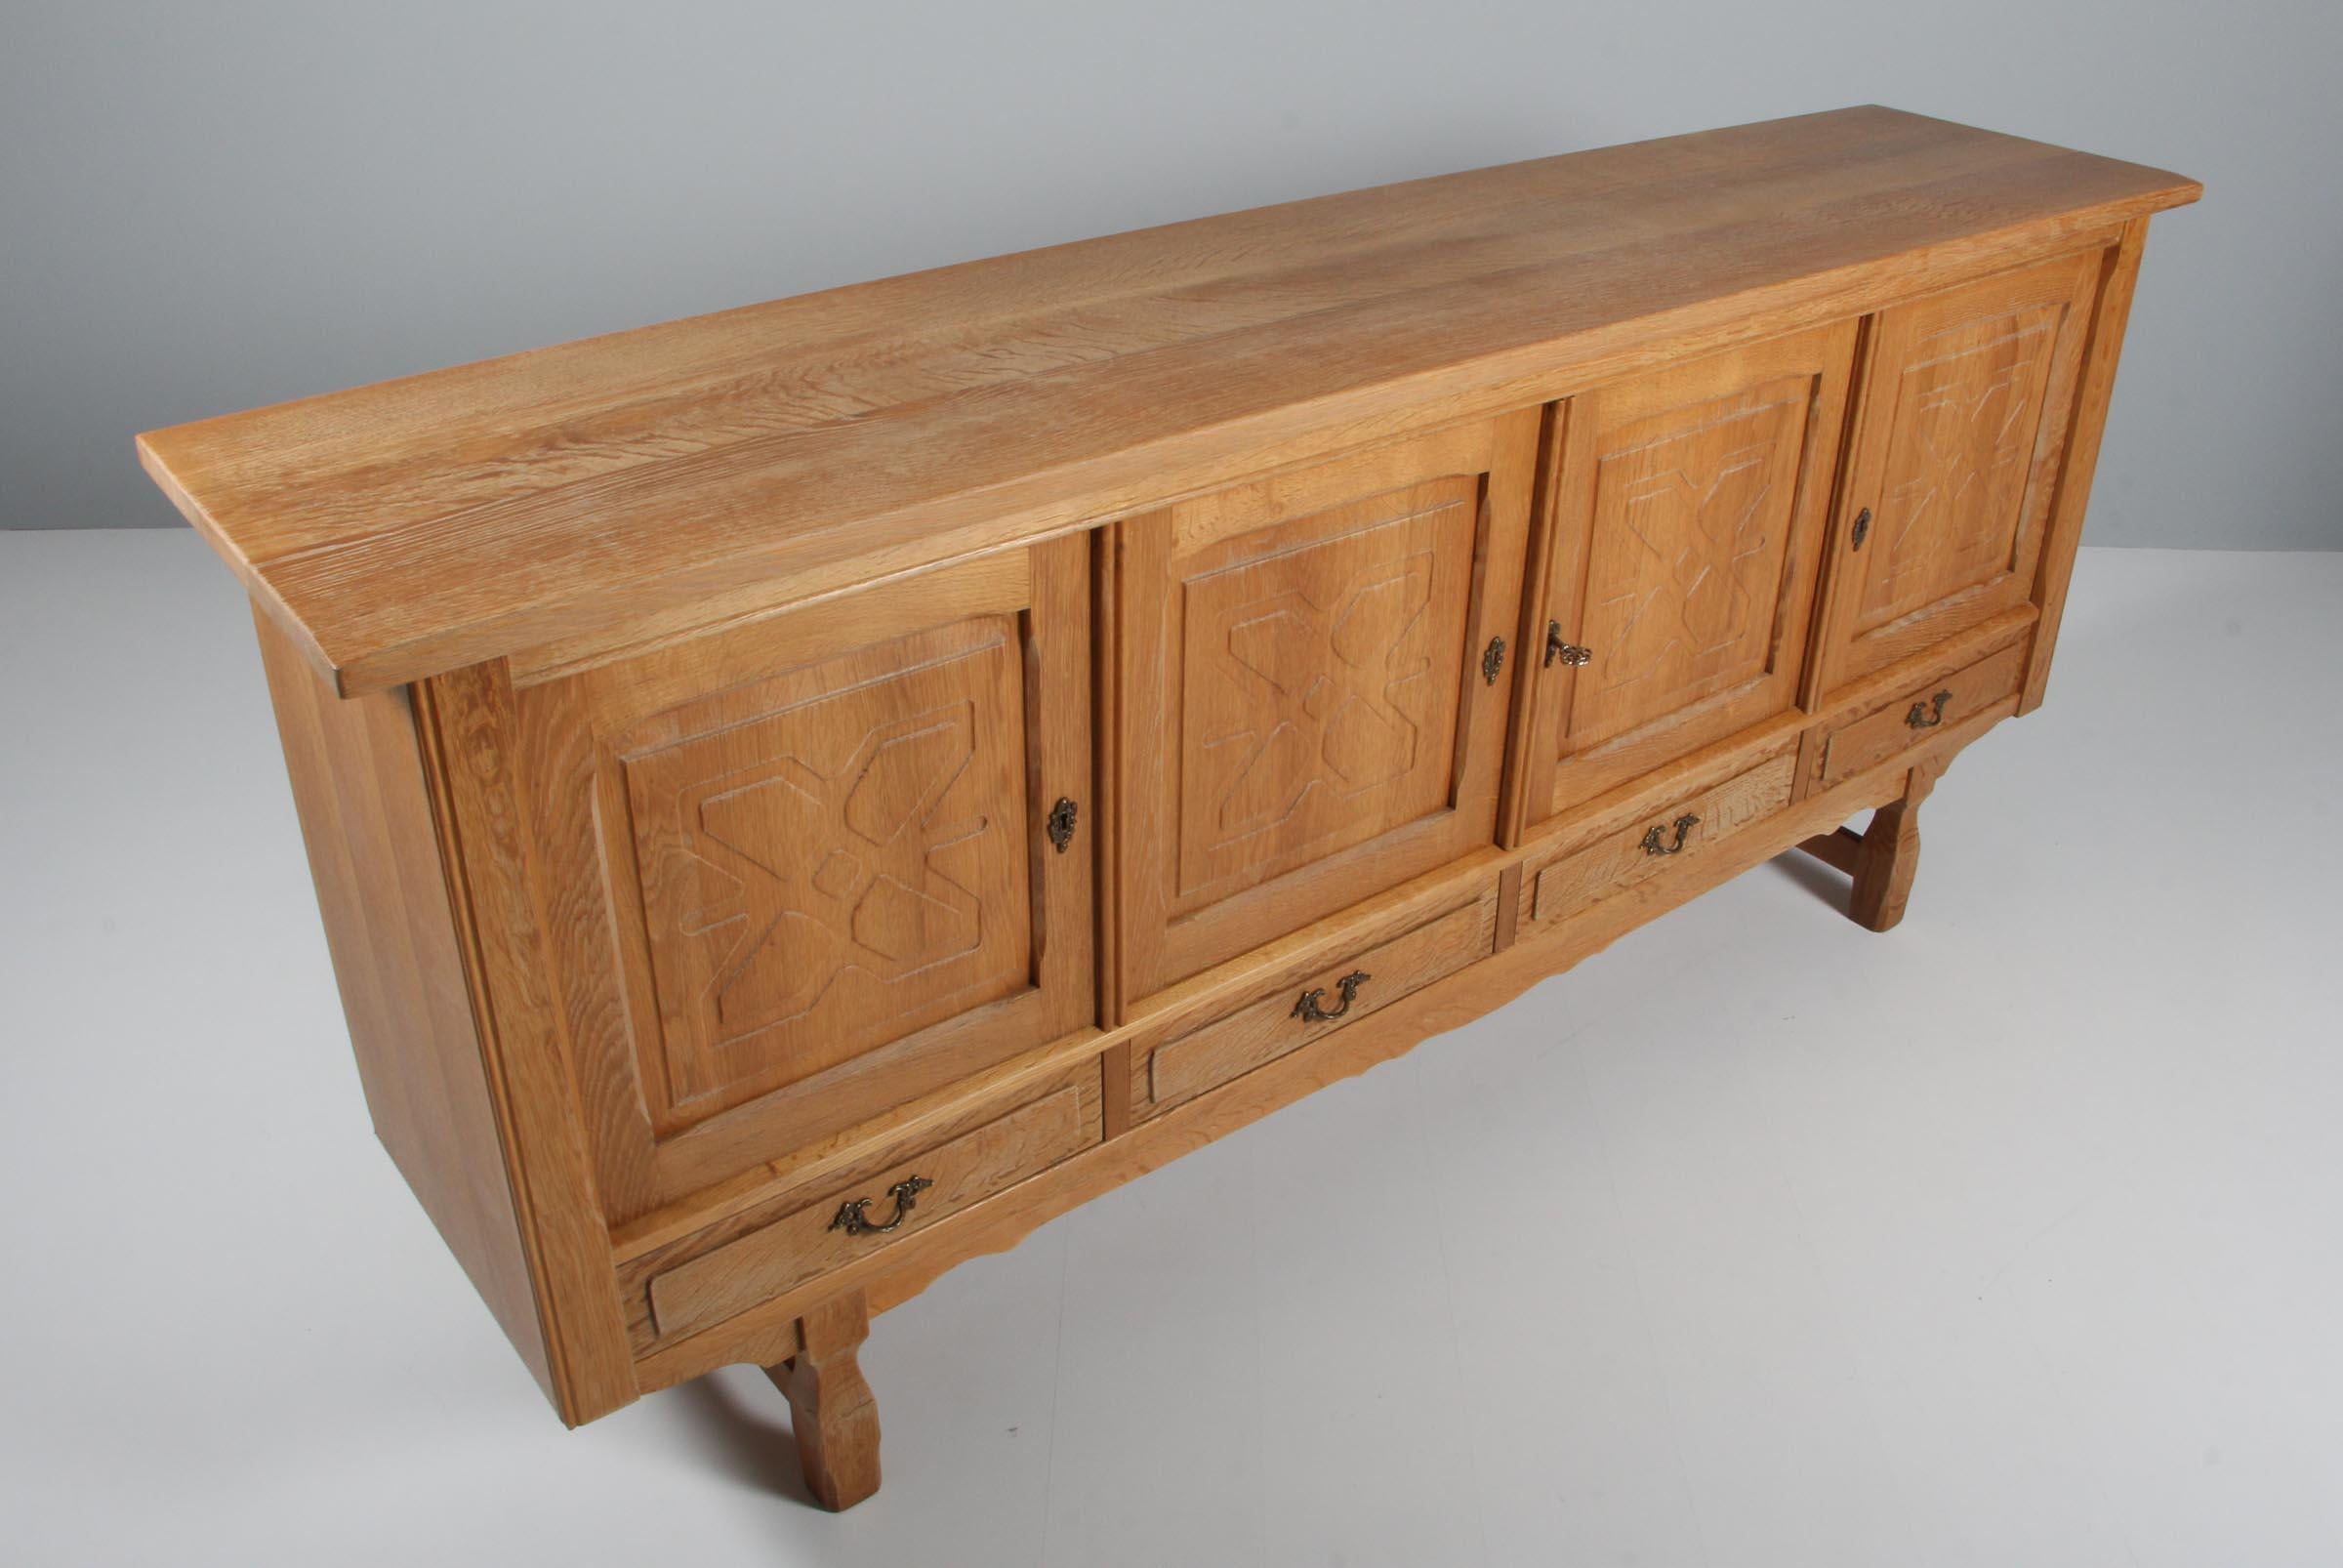 Striking highboard in oak with rich carved details. Attributed to Henry Kjærnulf. 

Refreshing design with bold Baroque coming together nicely with Mid-Century Modernism.

Probably made by EG møbler in the 1970s.
 